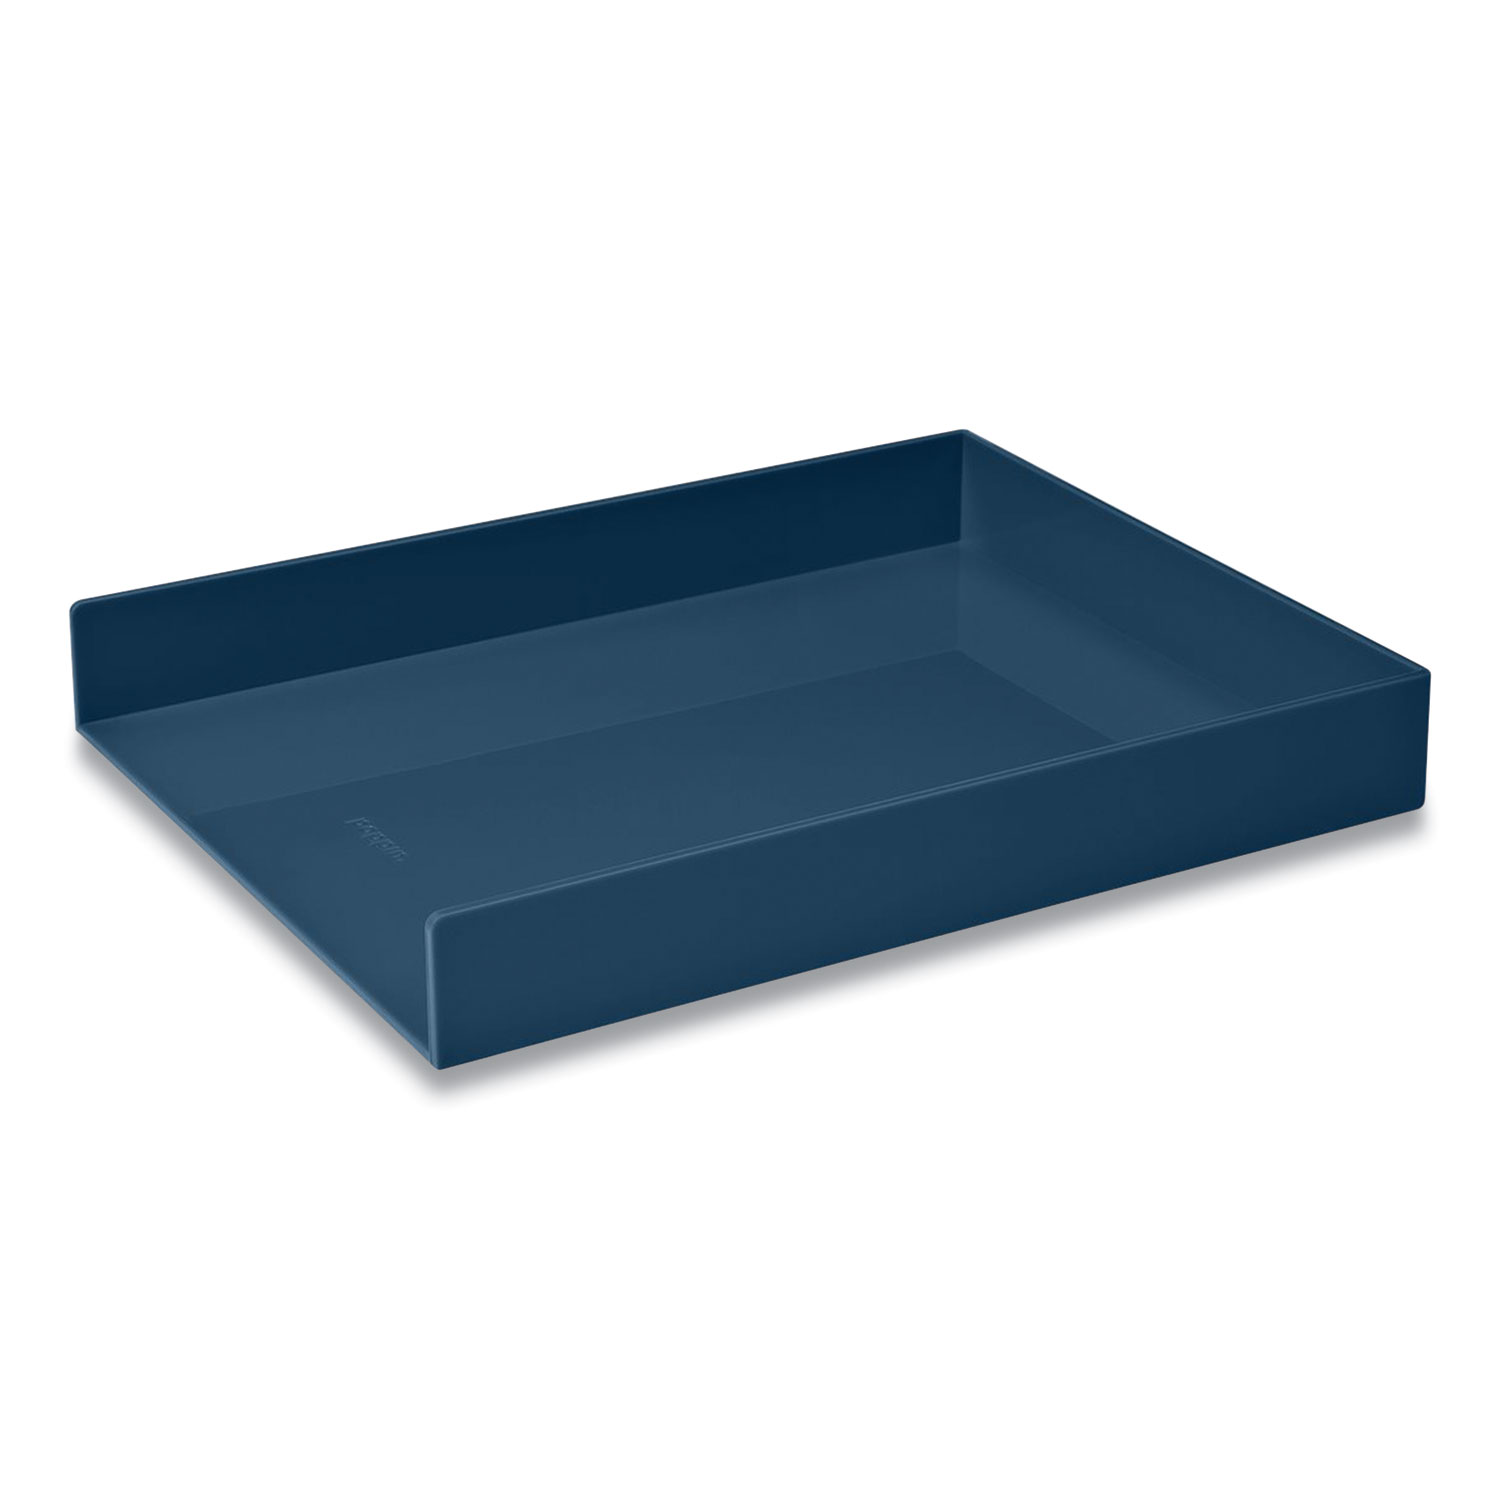  Poppin 105971 Stackable Letter Trays, 1 Section, Letter Size Files, 9.75 x 12.5 x 1.75, Slate Blue (PPJ24342719) 